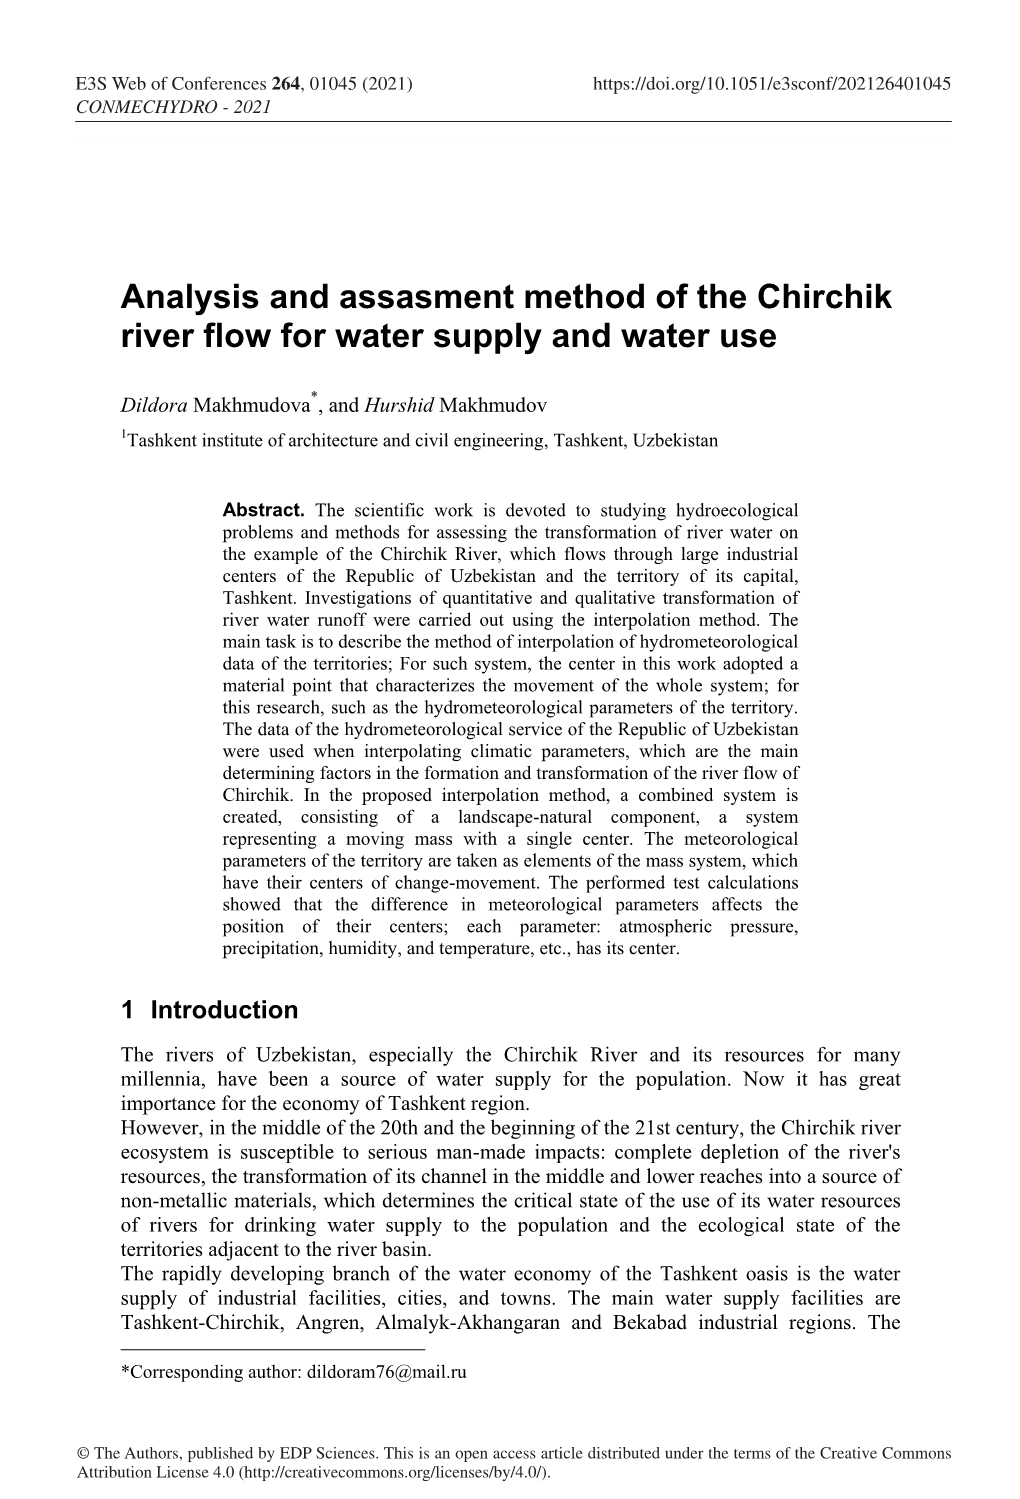 Analysis and Assasment Method of the Chirchik River Flow for Water Supply and Water Use